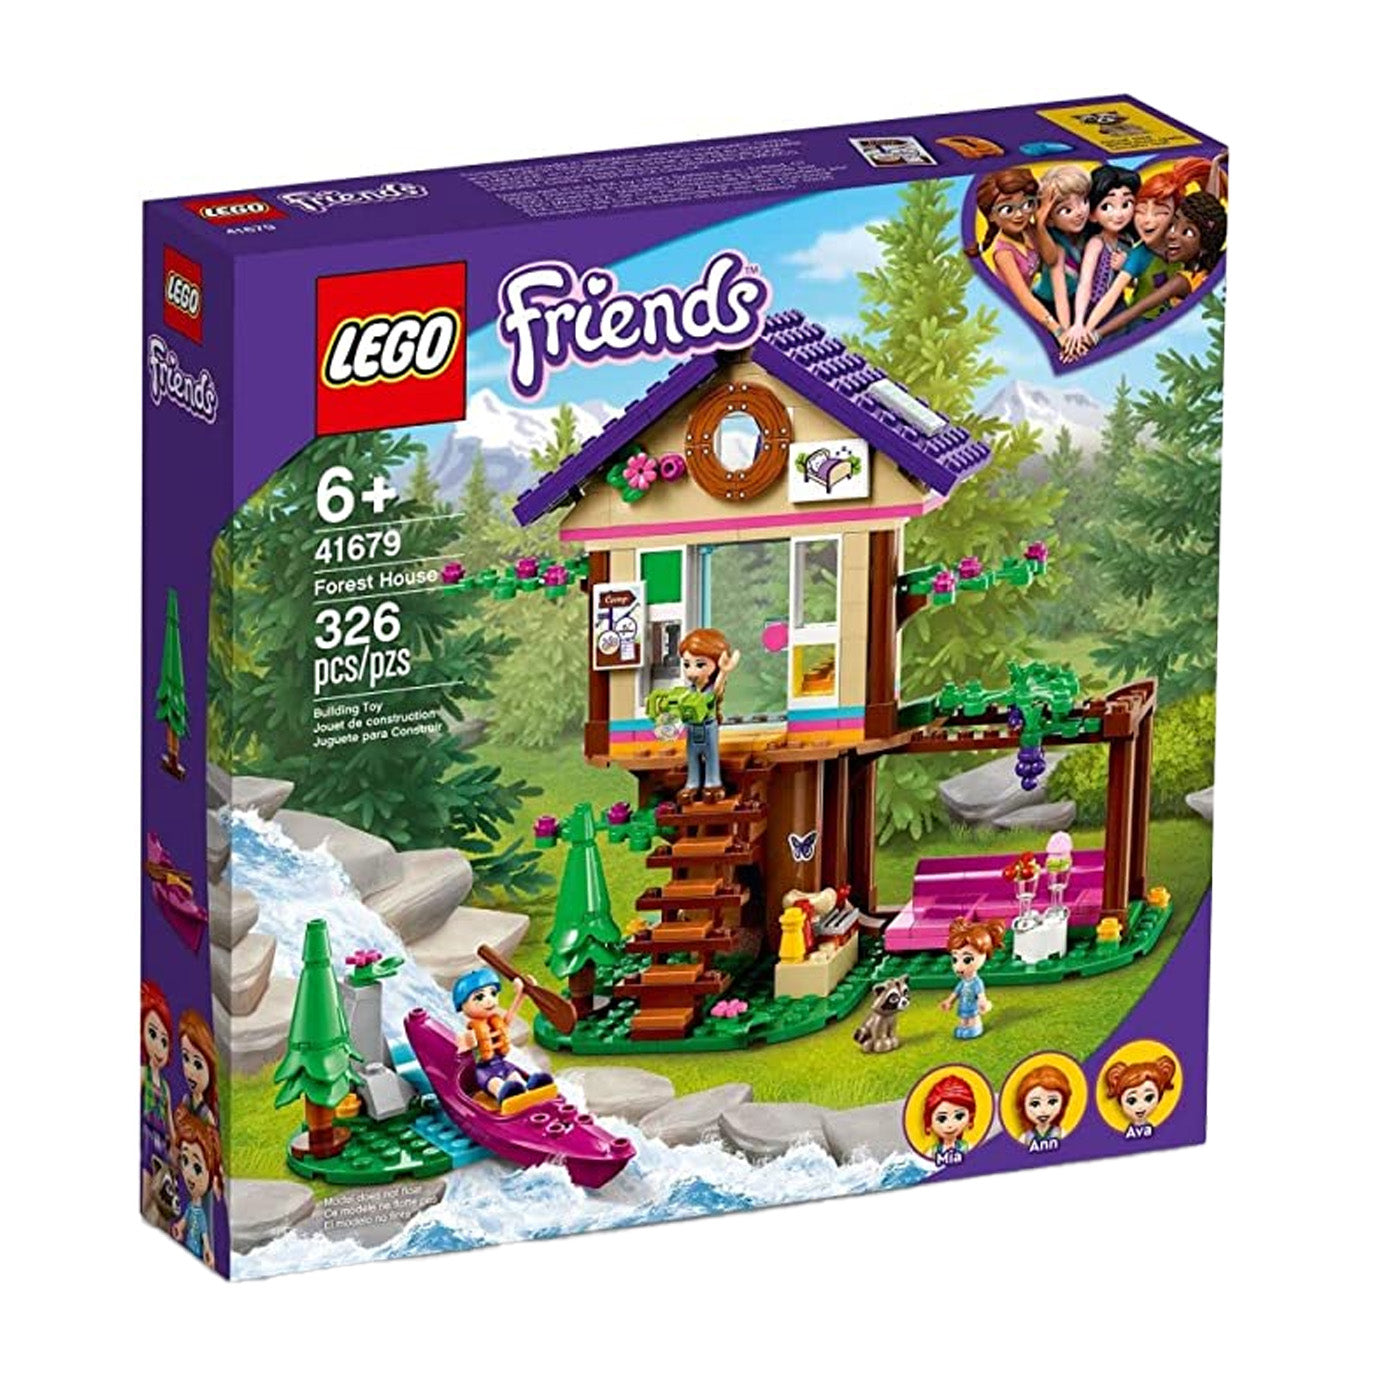 LEGO Friends: Forest House Set 41679